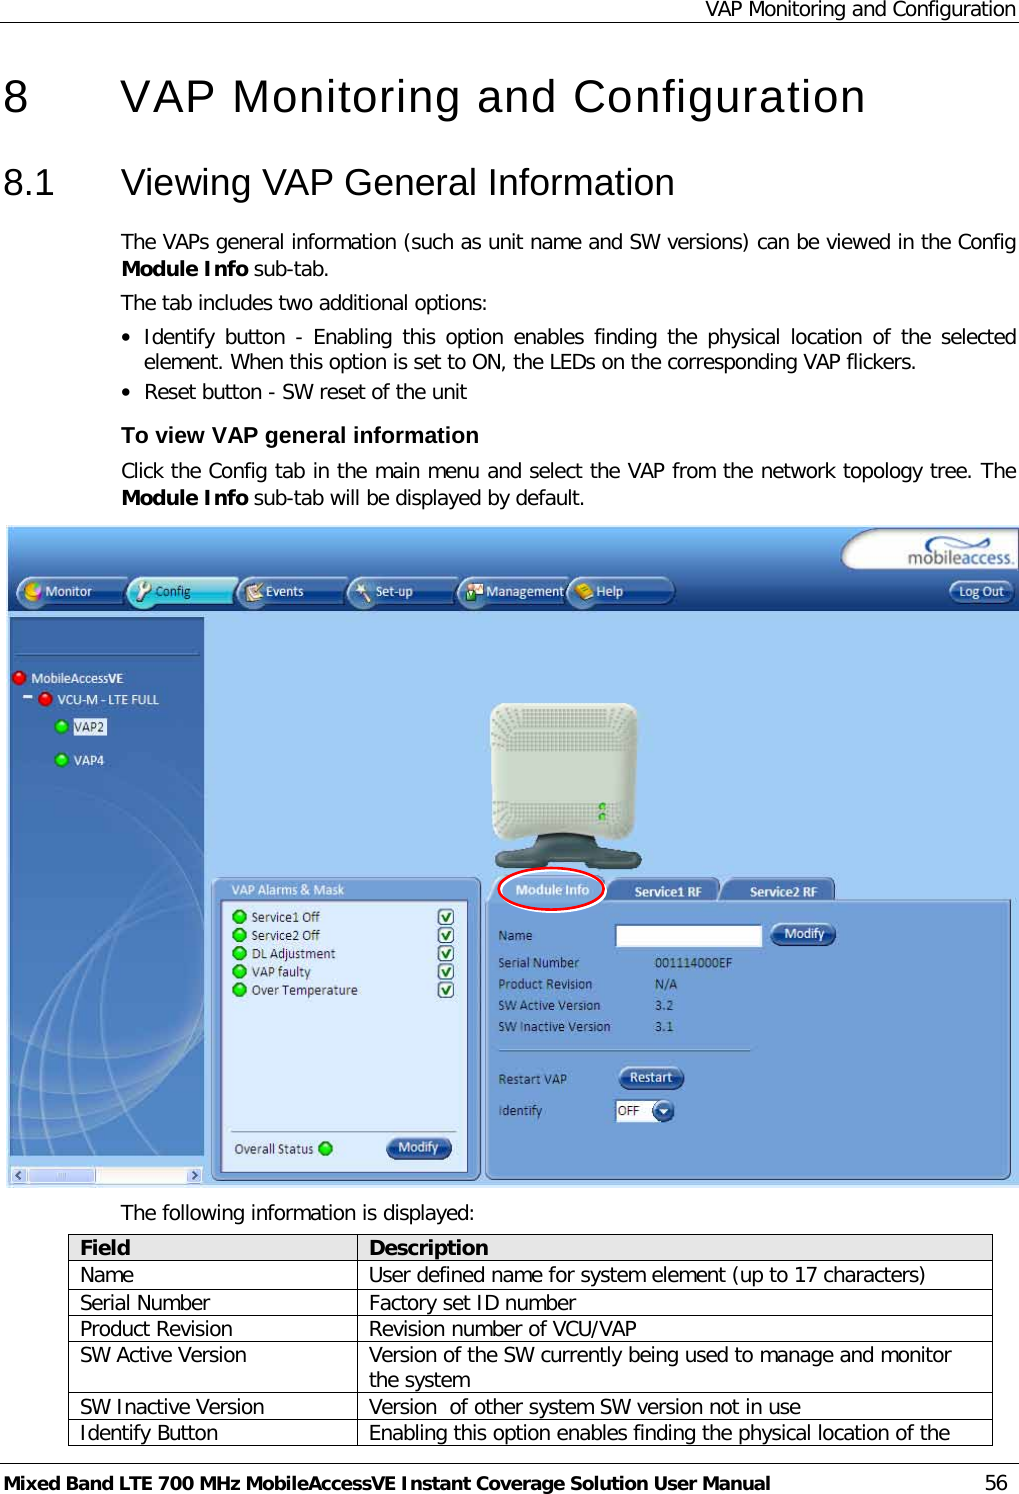 VAP Monitoring and Configuration Mixed Band LTE 700 MHz MobileAccessVE Instant Coverage Solution User Manual  56 8  VAP Monitoring and Configuration  8.1  Viewing VAP General Information The VAPs general information (such as unit name and SW versions) can be viewed in the Config Module Info sub-tab. The tab includes two additional options: • Identify button - Enabling this option enables finding the physical location of the selected element. When this option is set to ON, the LEDs on the corresponding VAP flickers. • Reset button - SW reset of the unit To view VAP general information Click the Config tab in the main menu and select the VAP from the network topology tree. The Module Info sub-tab will be displayed by default.  The following information is displayed: Field Description Name User defined name for system element (up to 17 characters) Serial Number Factory set ID number Product Revision Revision number of VCU/VAP SW Active Version Version of the SW currently being used to manage and monitor the system SW Inactive Version Version  of other system SW version not in use Identify Button Enabling this option enables finding the physical location of the 